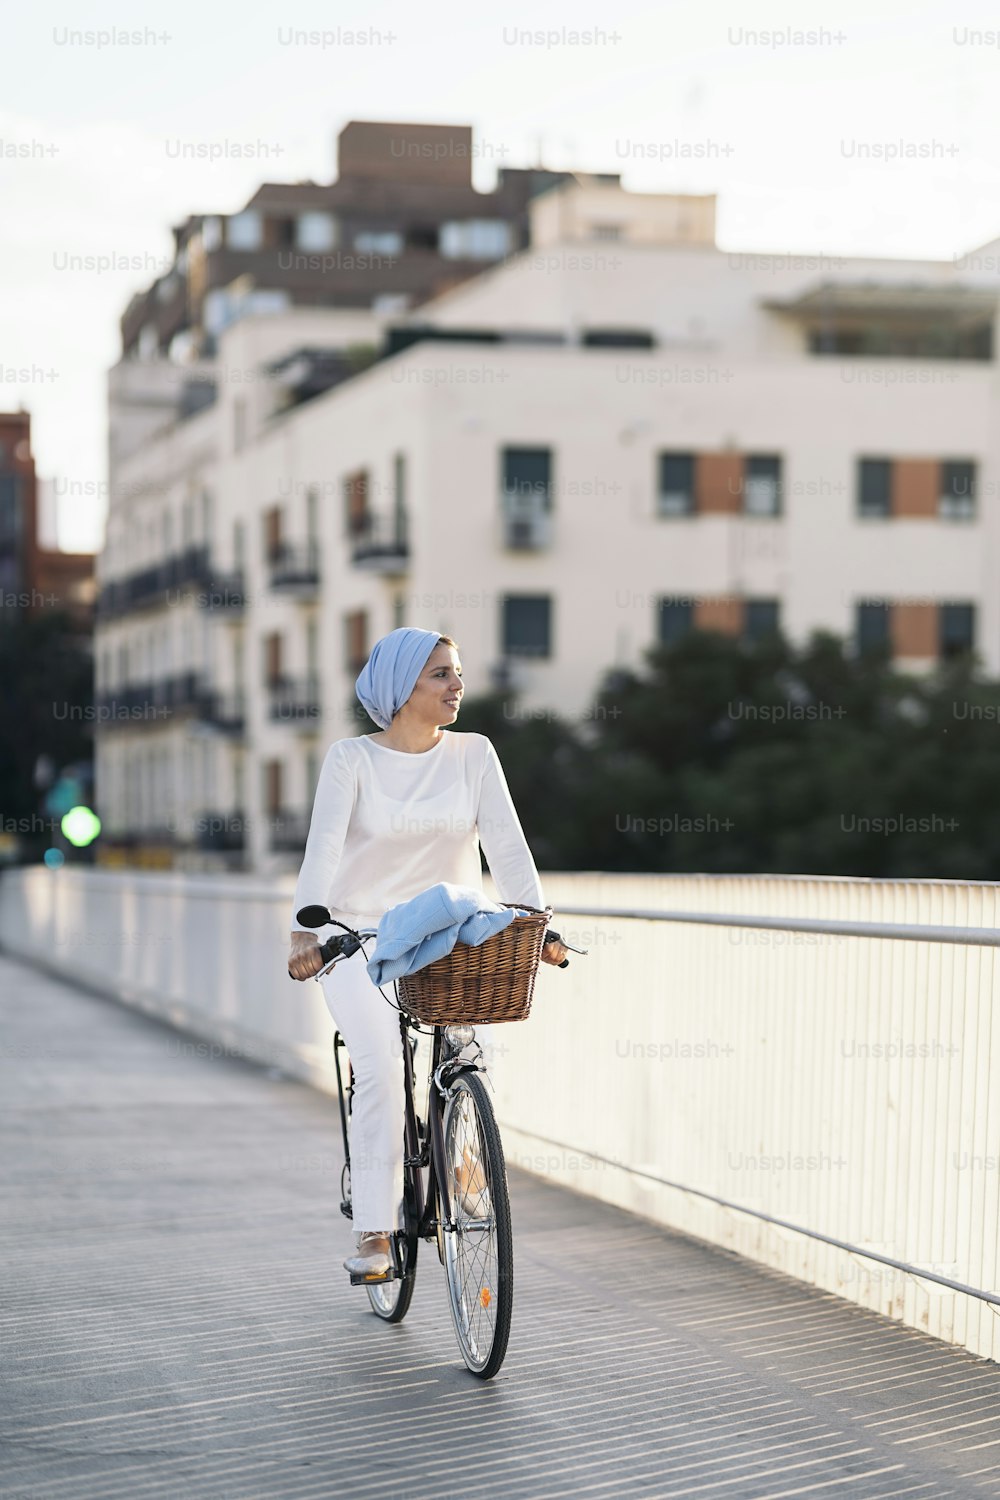 Vertical image of a muslim woman riding her bicycle on the sidewalk looking away in a sunny day.